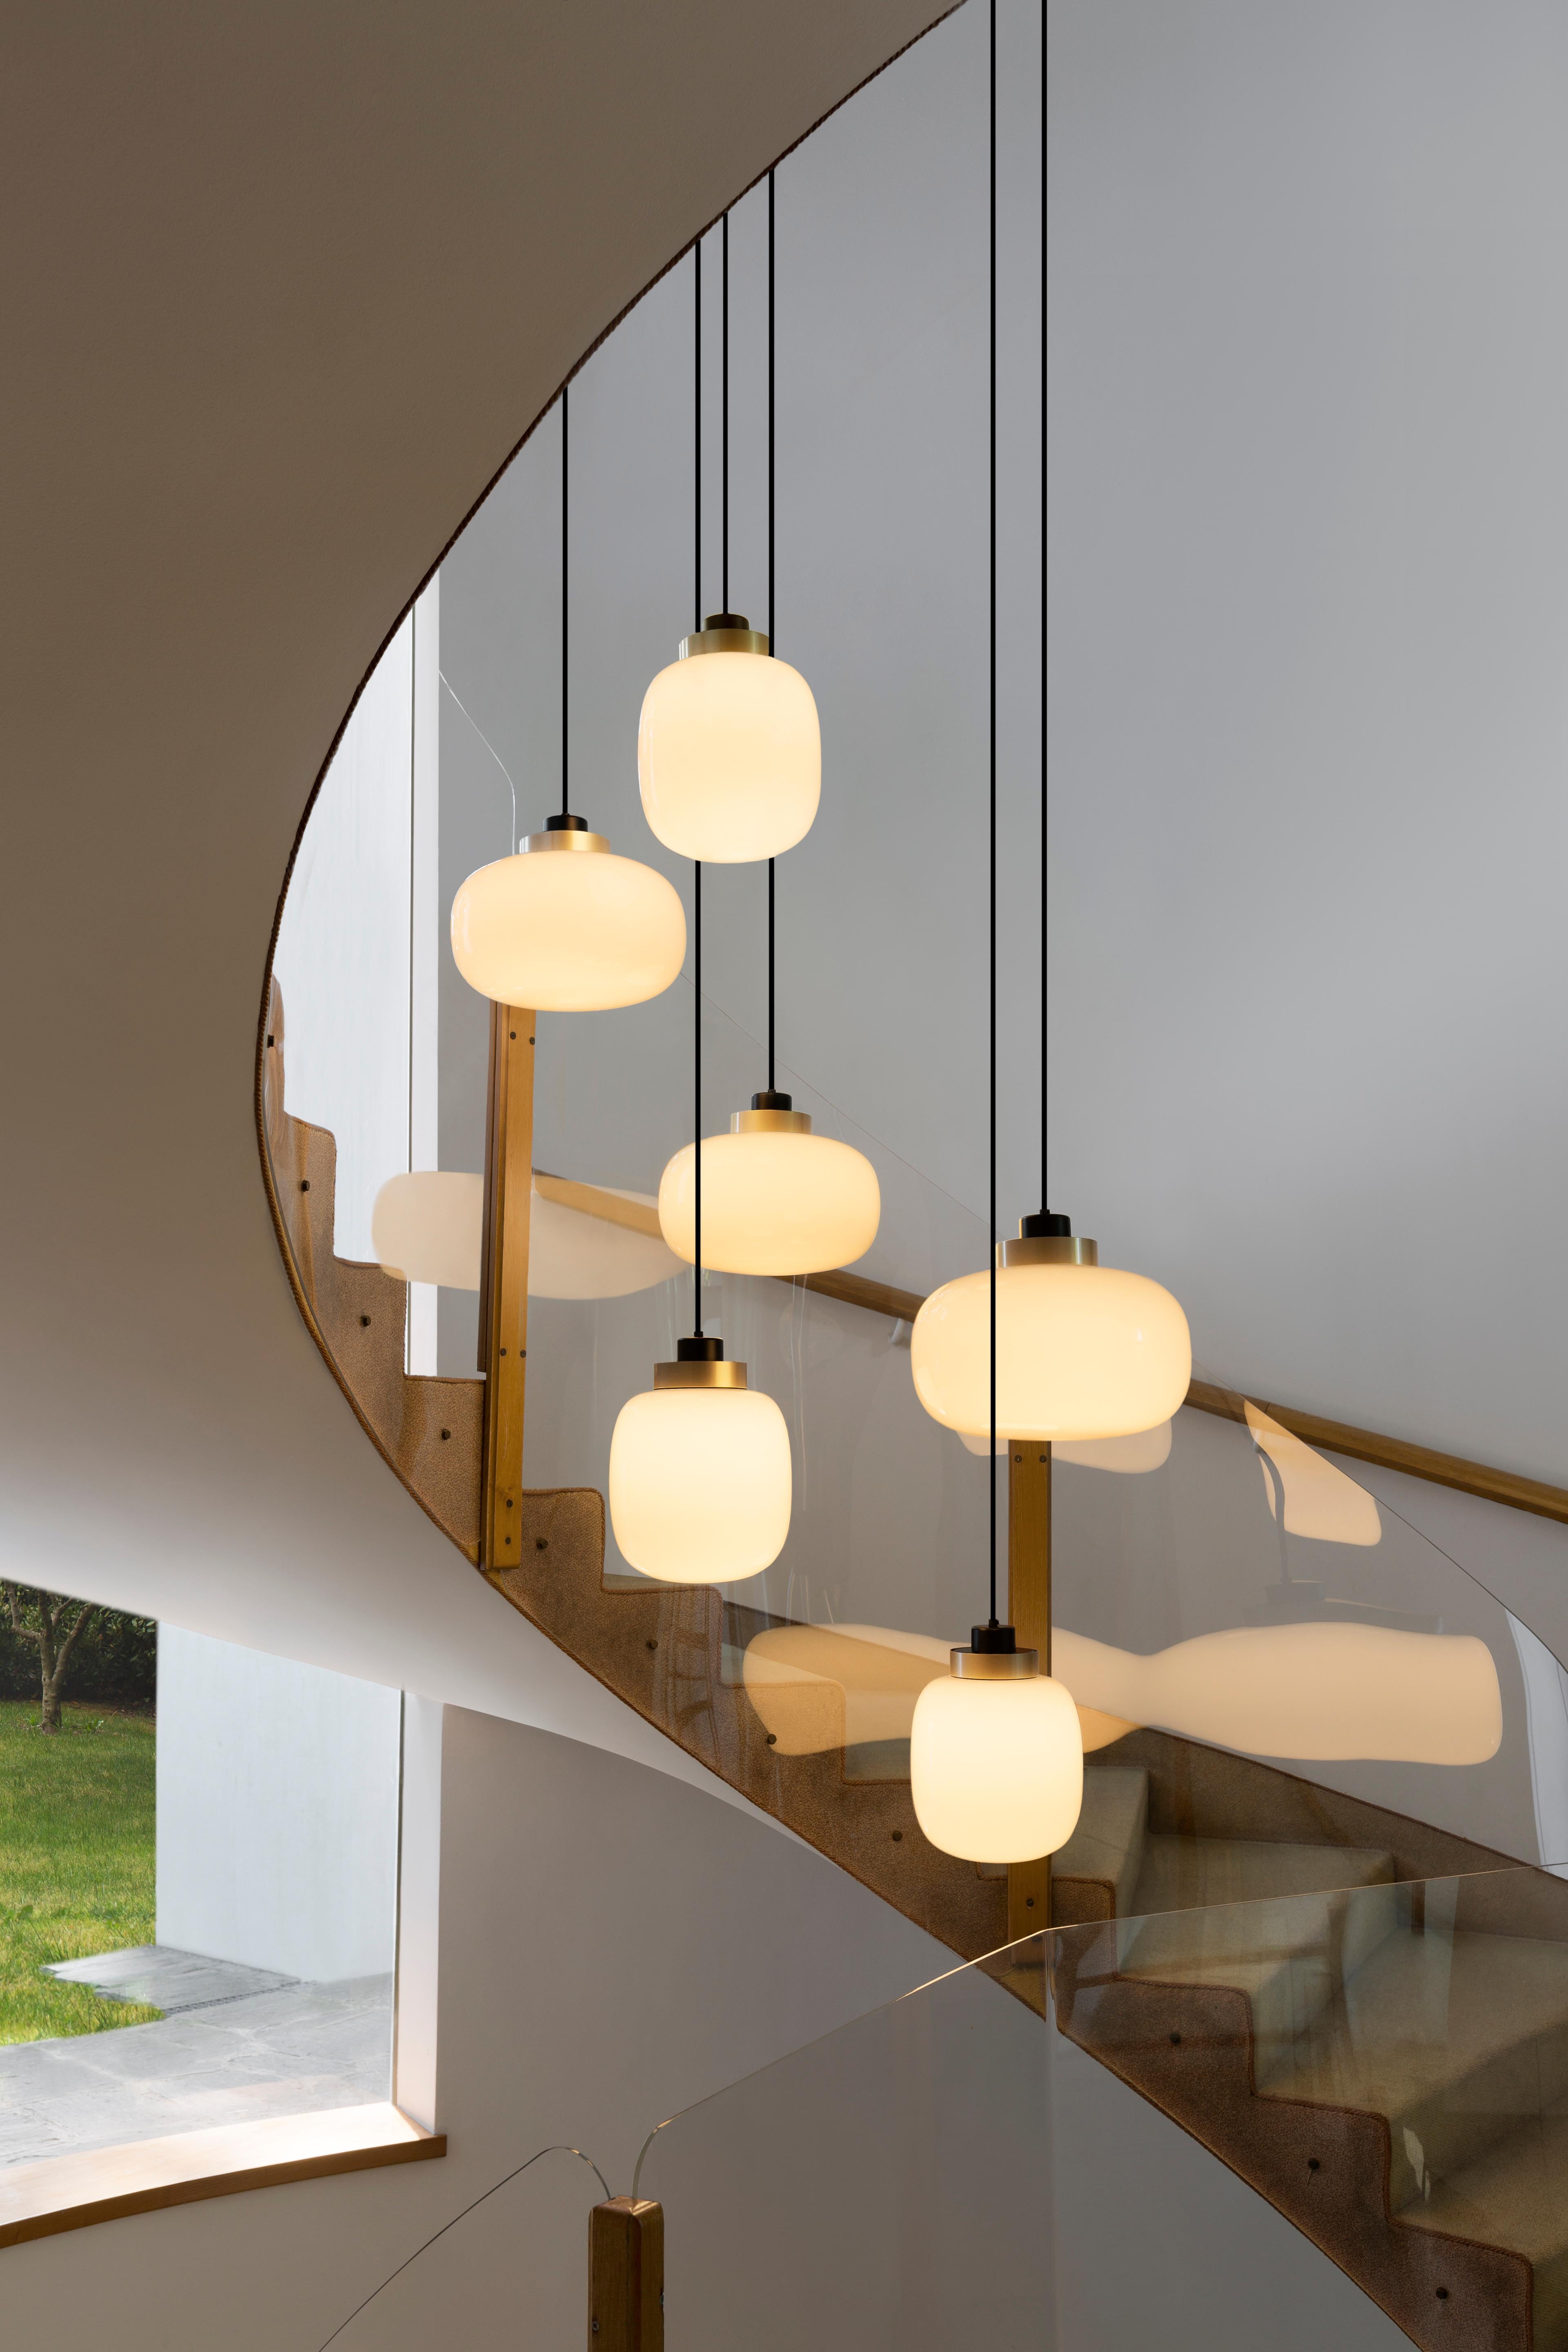 Chandelier Legier by Tooy.
6 Pendants version. (Compliant with US electric system)

Dimensions: 
- Small pendant (x 3 ): height 33 cm x diameter 25 cm. 
- Large pendant (x 3 ): height 28 cm x diameter 35 cm. 

Model shown: C74 + C30
Finish: Light